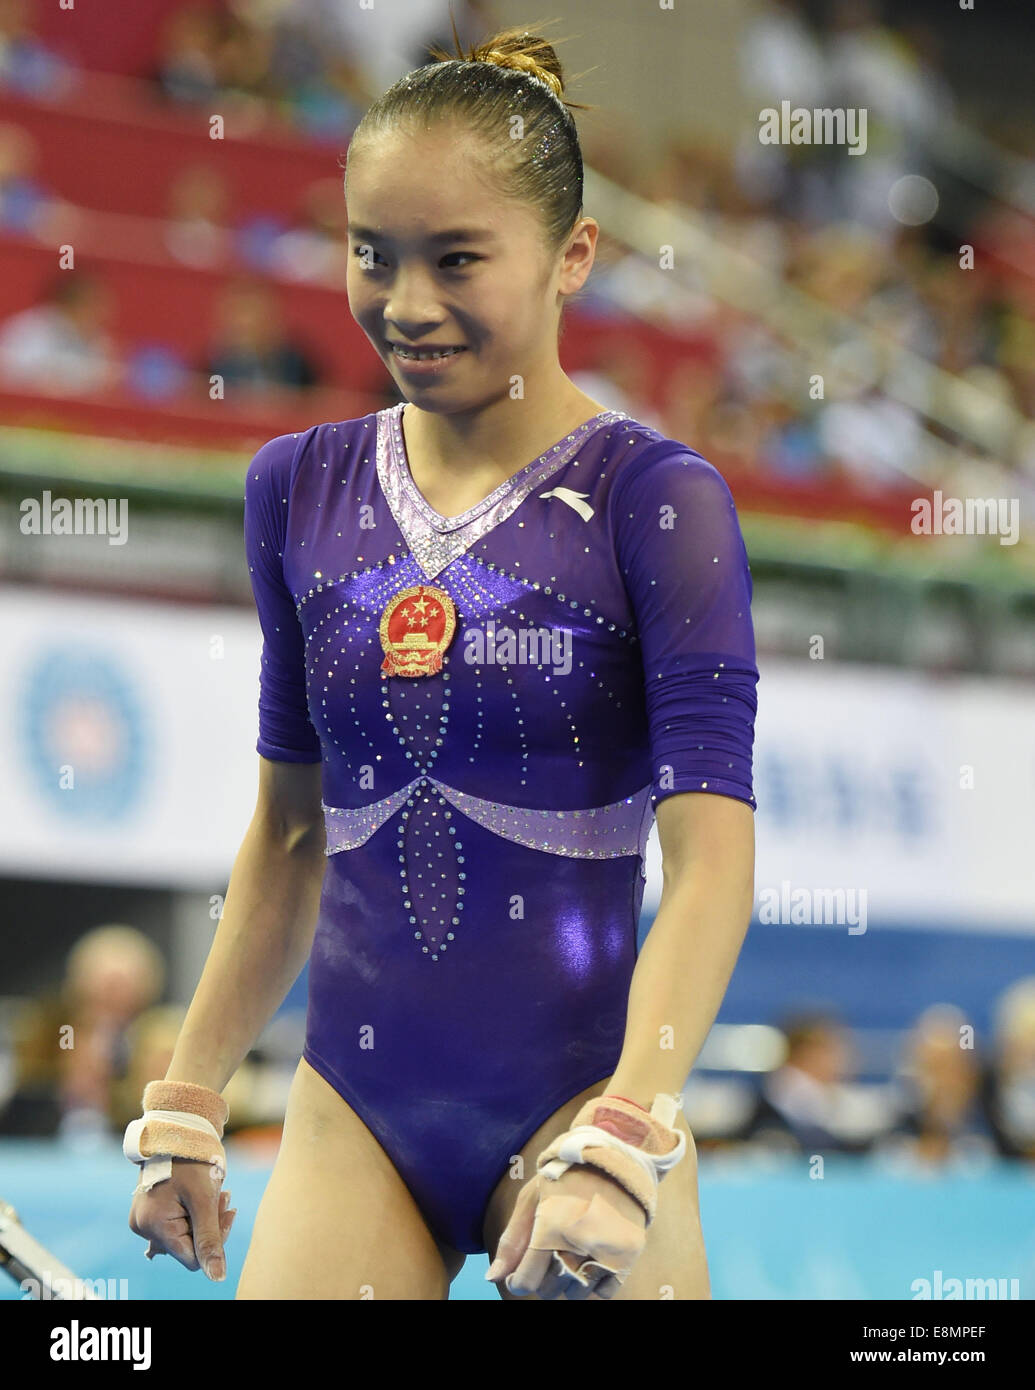 Nanning, China's Guangxi Zhuang Autonomous Region. 11th Oct, 2014. Chinese gymnast Yao Jinnan reacts after her uneven bars performance during the women's individual apparatus finals of the 45th Gymnastics World Championships in Nanning, capital of south China's Guangxi Zhuang Autonomous Region, Oct. 11, 2014. Yao Jinnan won the gold medal in the women's uneven bars final with 15.633 points. Credit:  Yang Zongyou/Xinhua/Alamy Live News Stock Photo